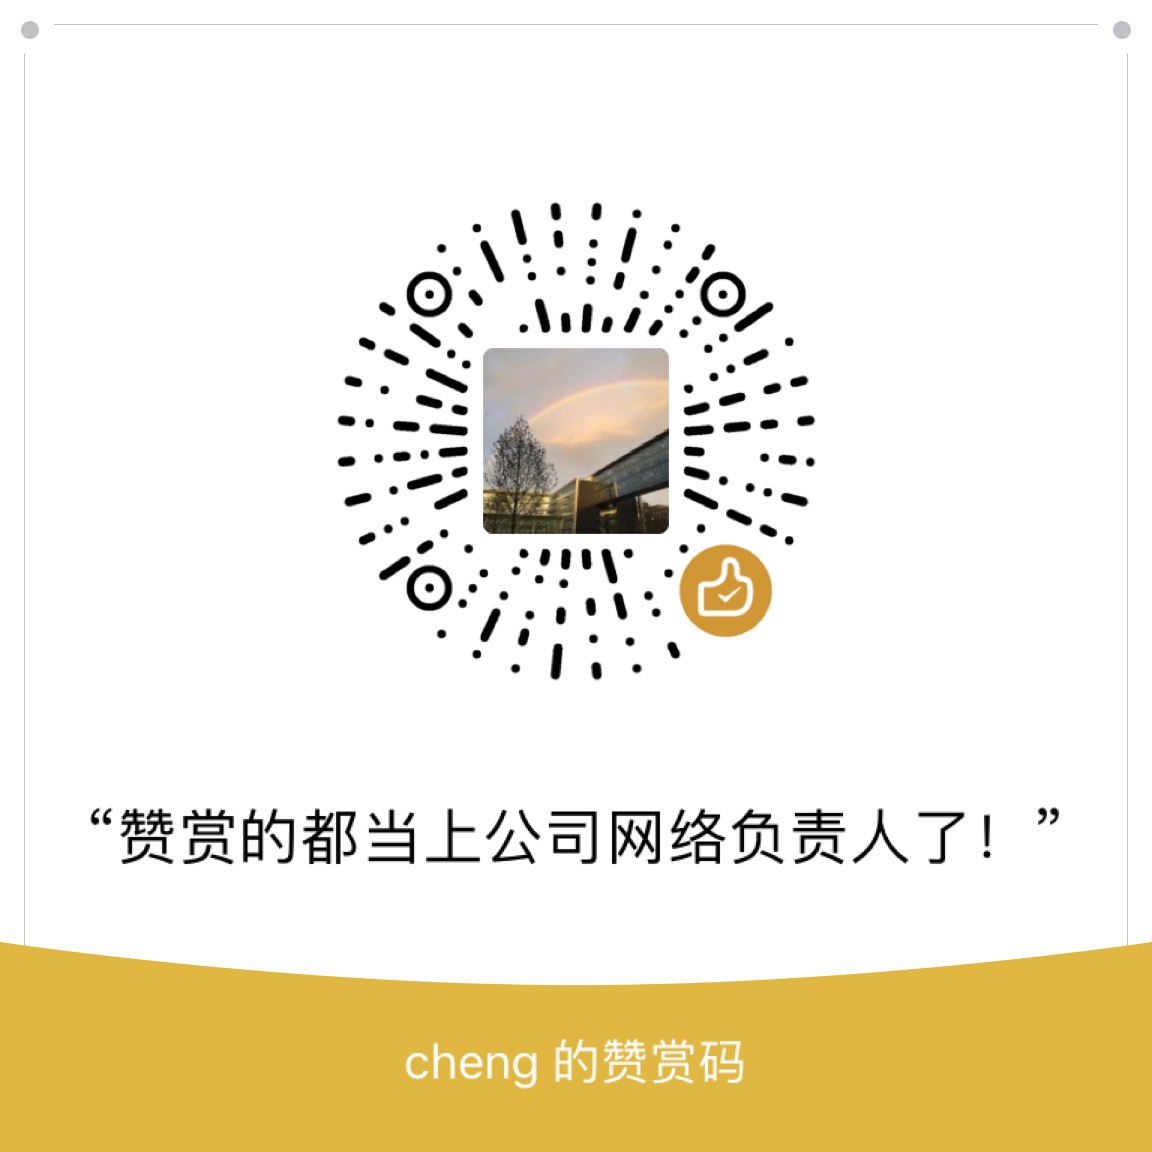 jeffrycheng WeChat Pay